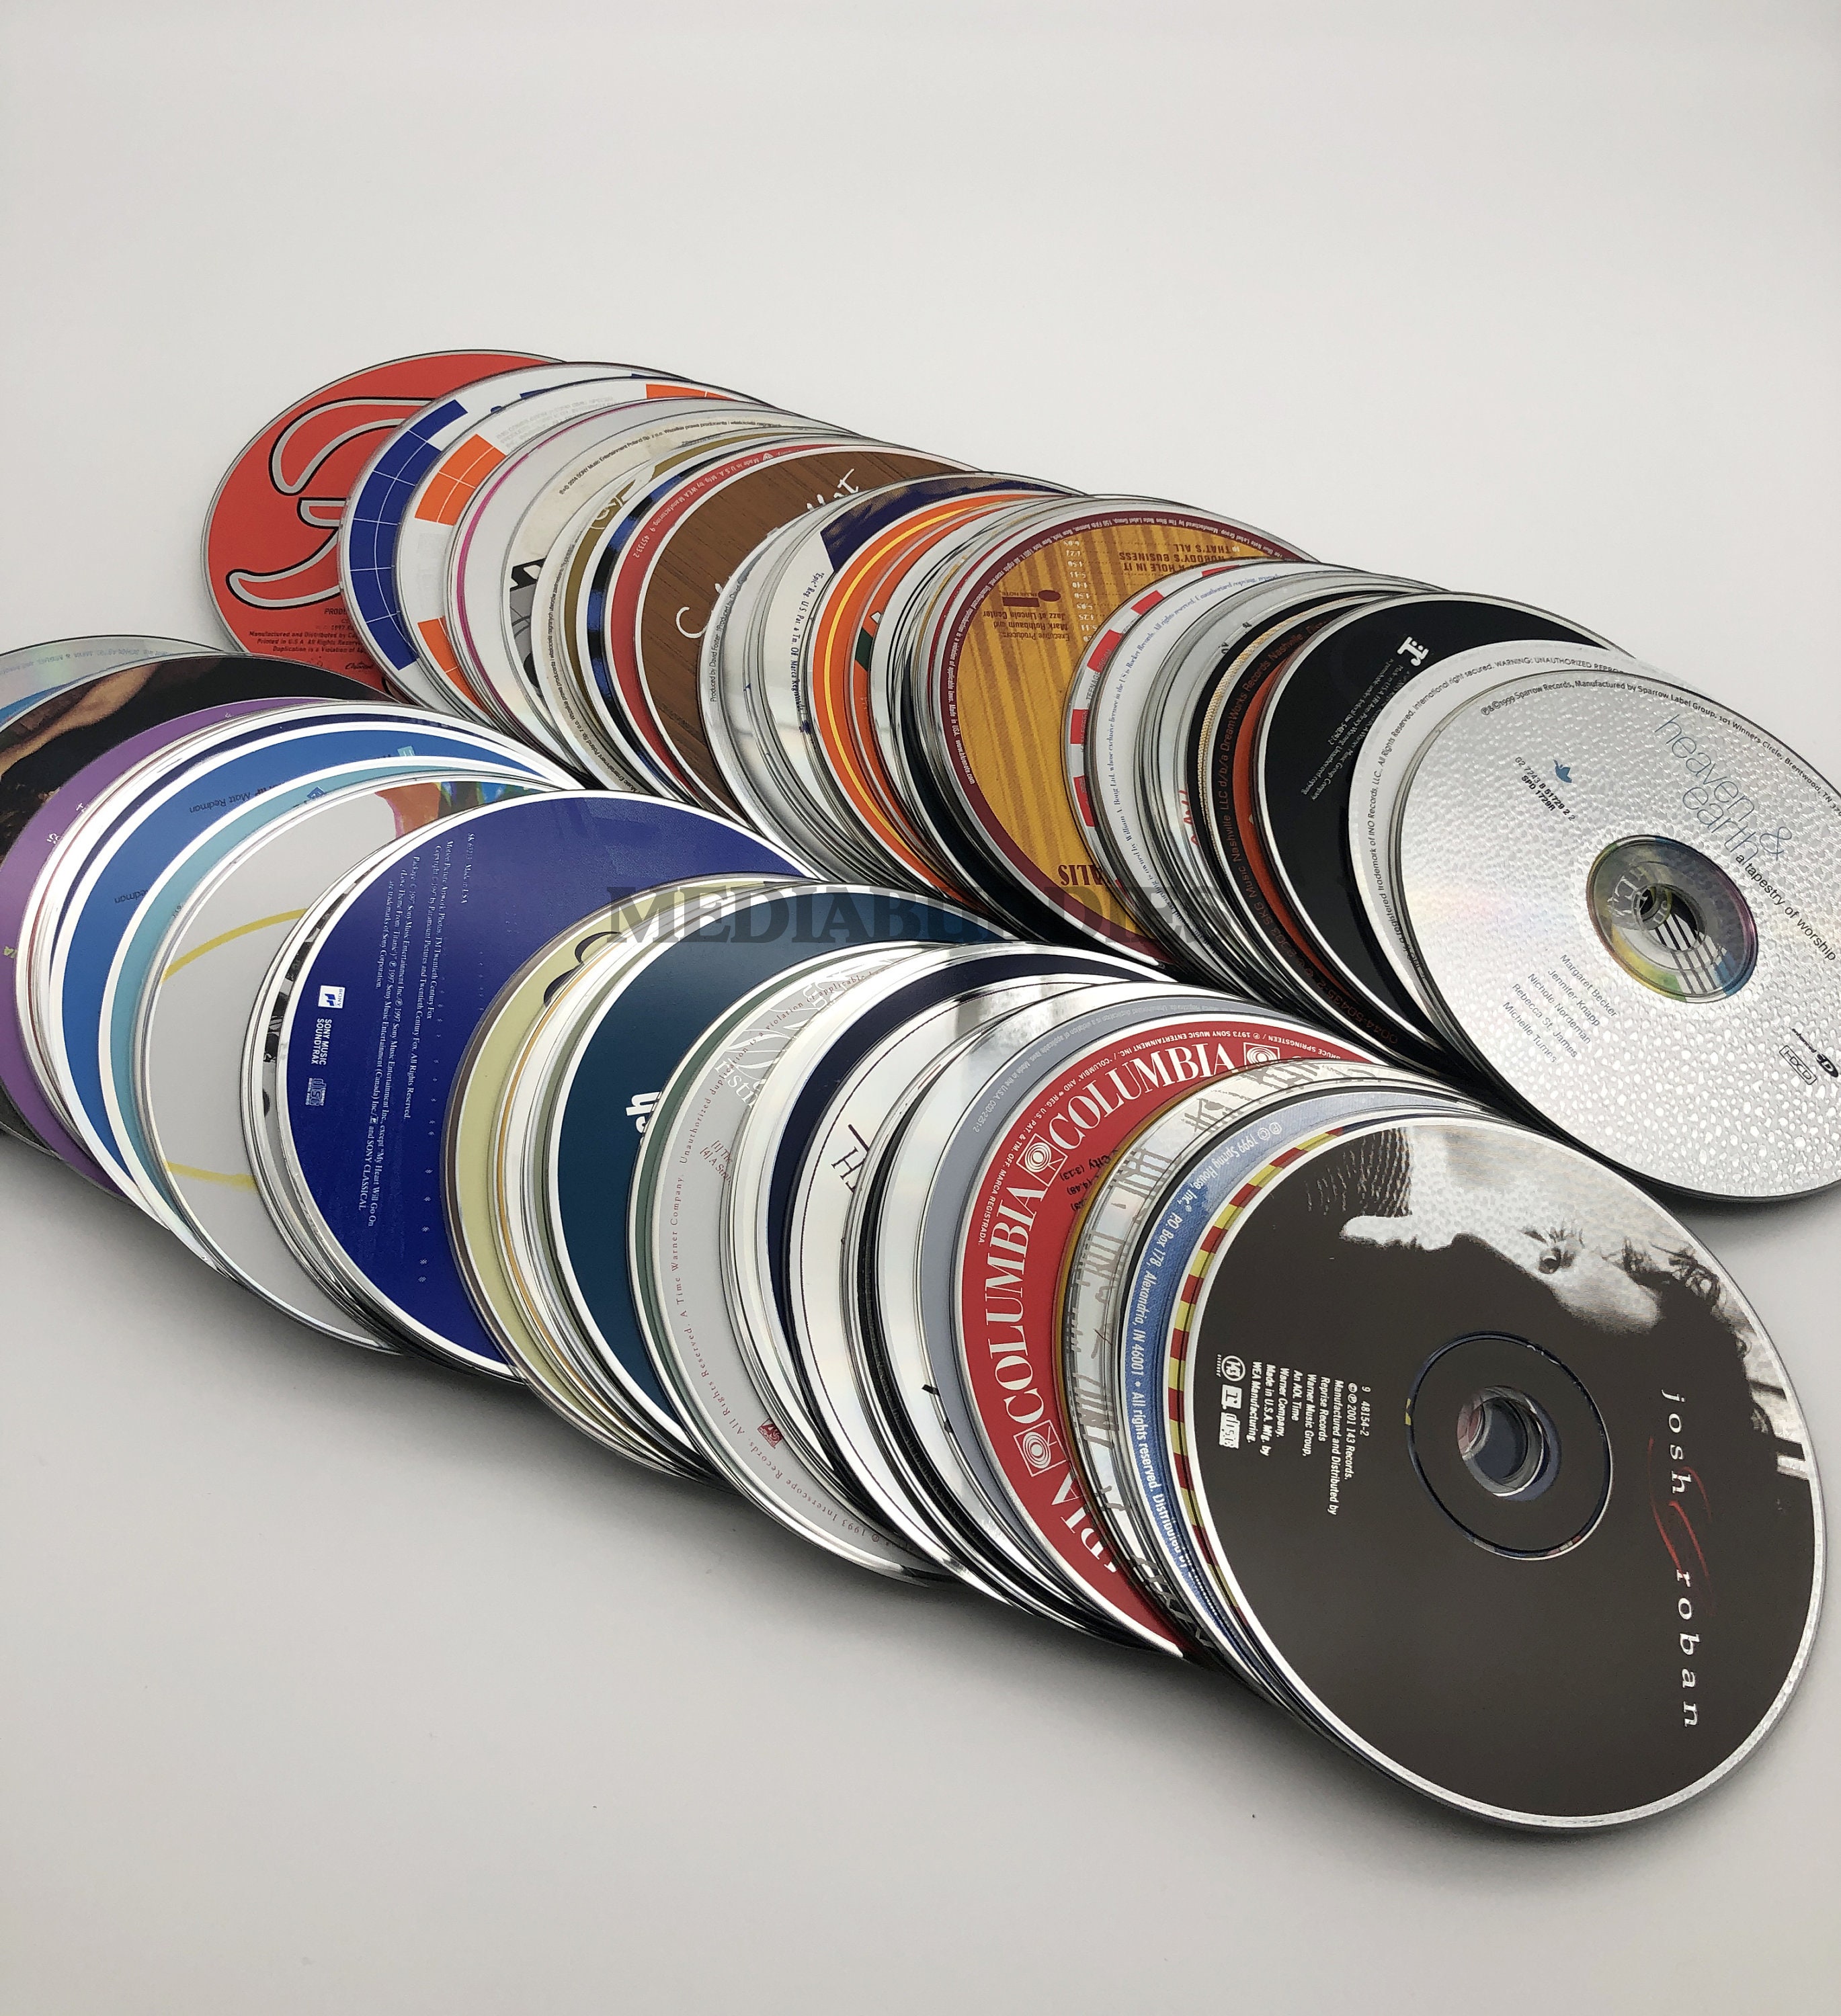 Huge Wholesale Lot of 100 Cds Music Assorted Cds Audio Bulk Mixed Used  Music Mystery Lot Bundle Best Collection Variety Wholesale Price -   Canada